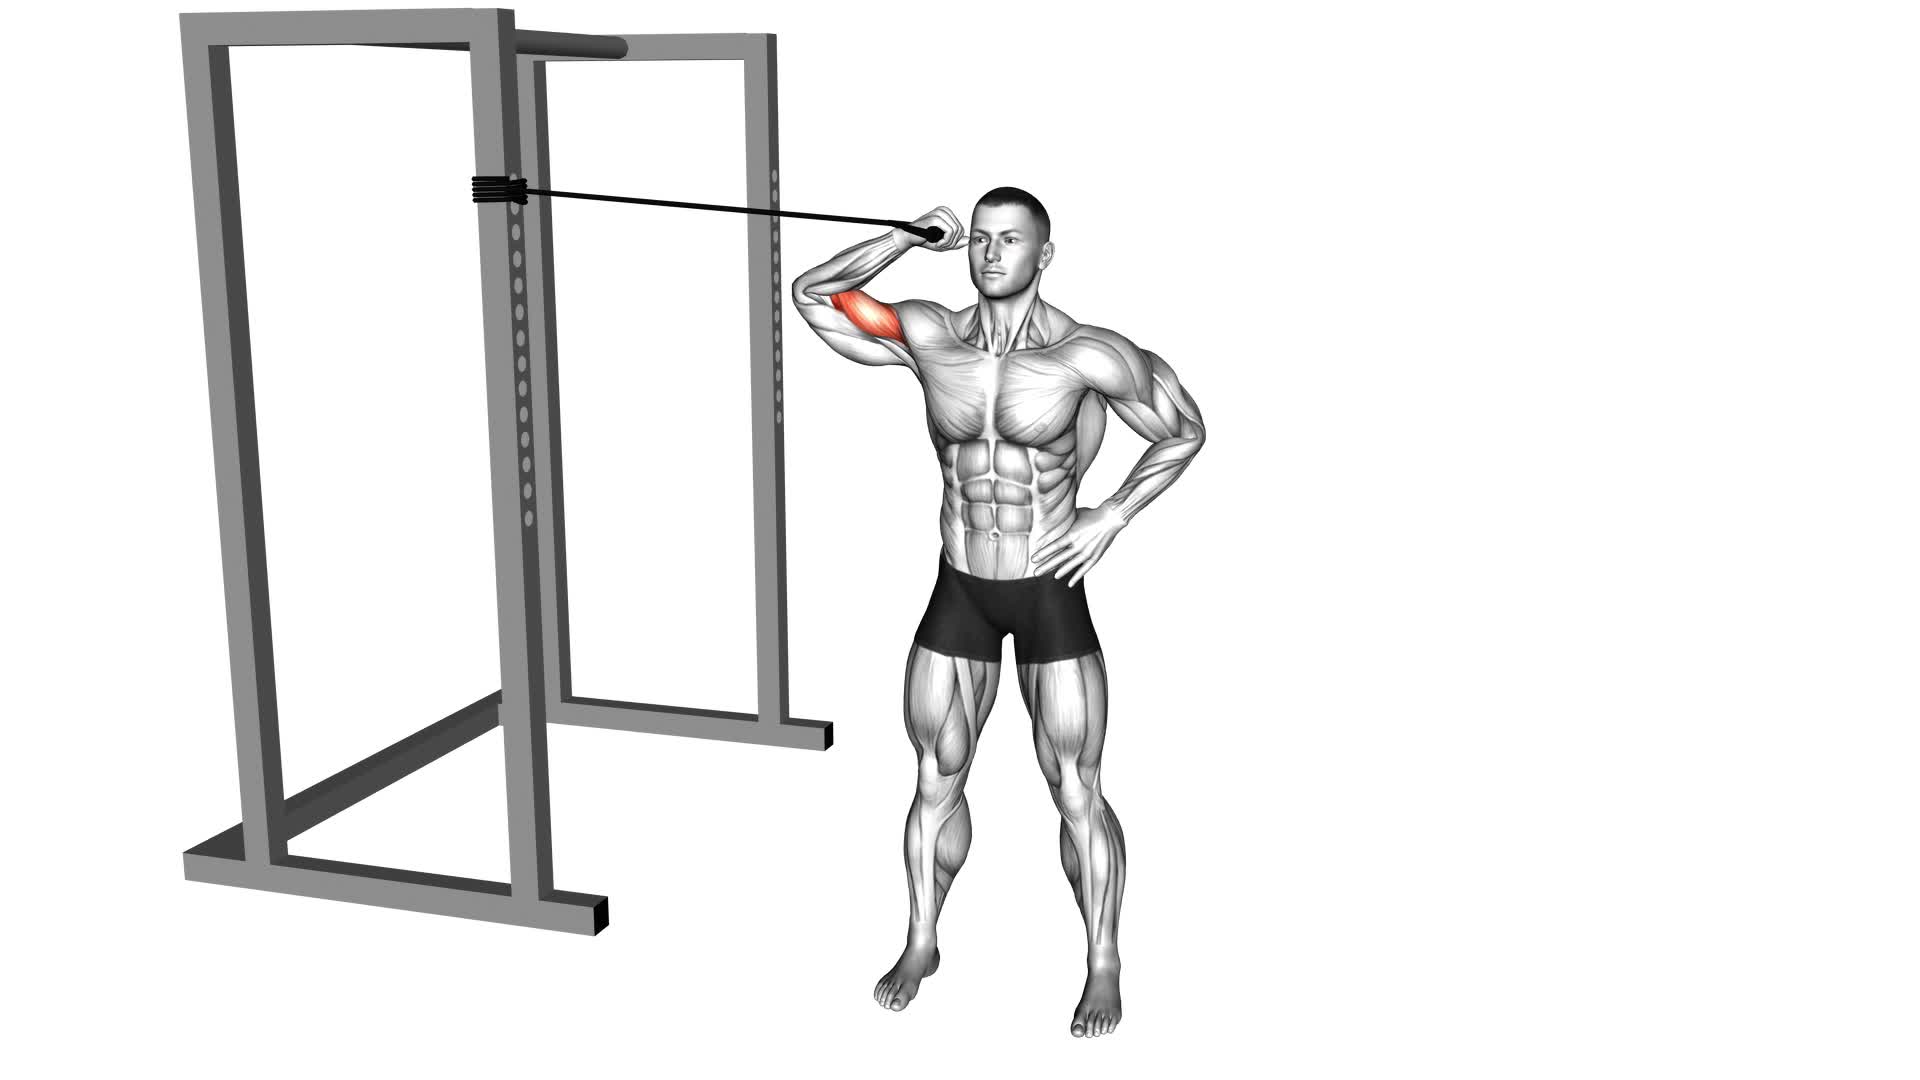 Band One Arm Overhead Biceps Curl - Video Exercise Guide & Tips